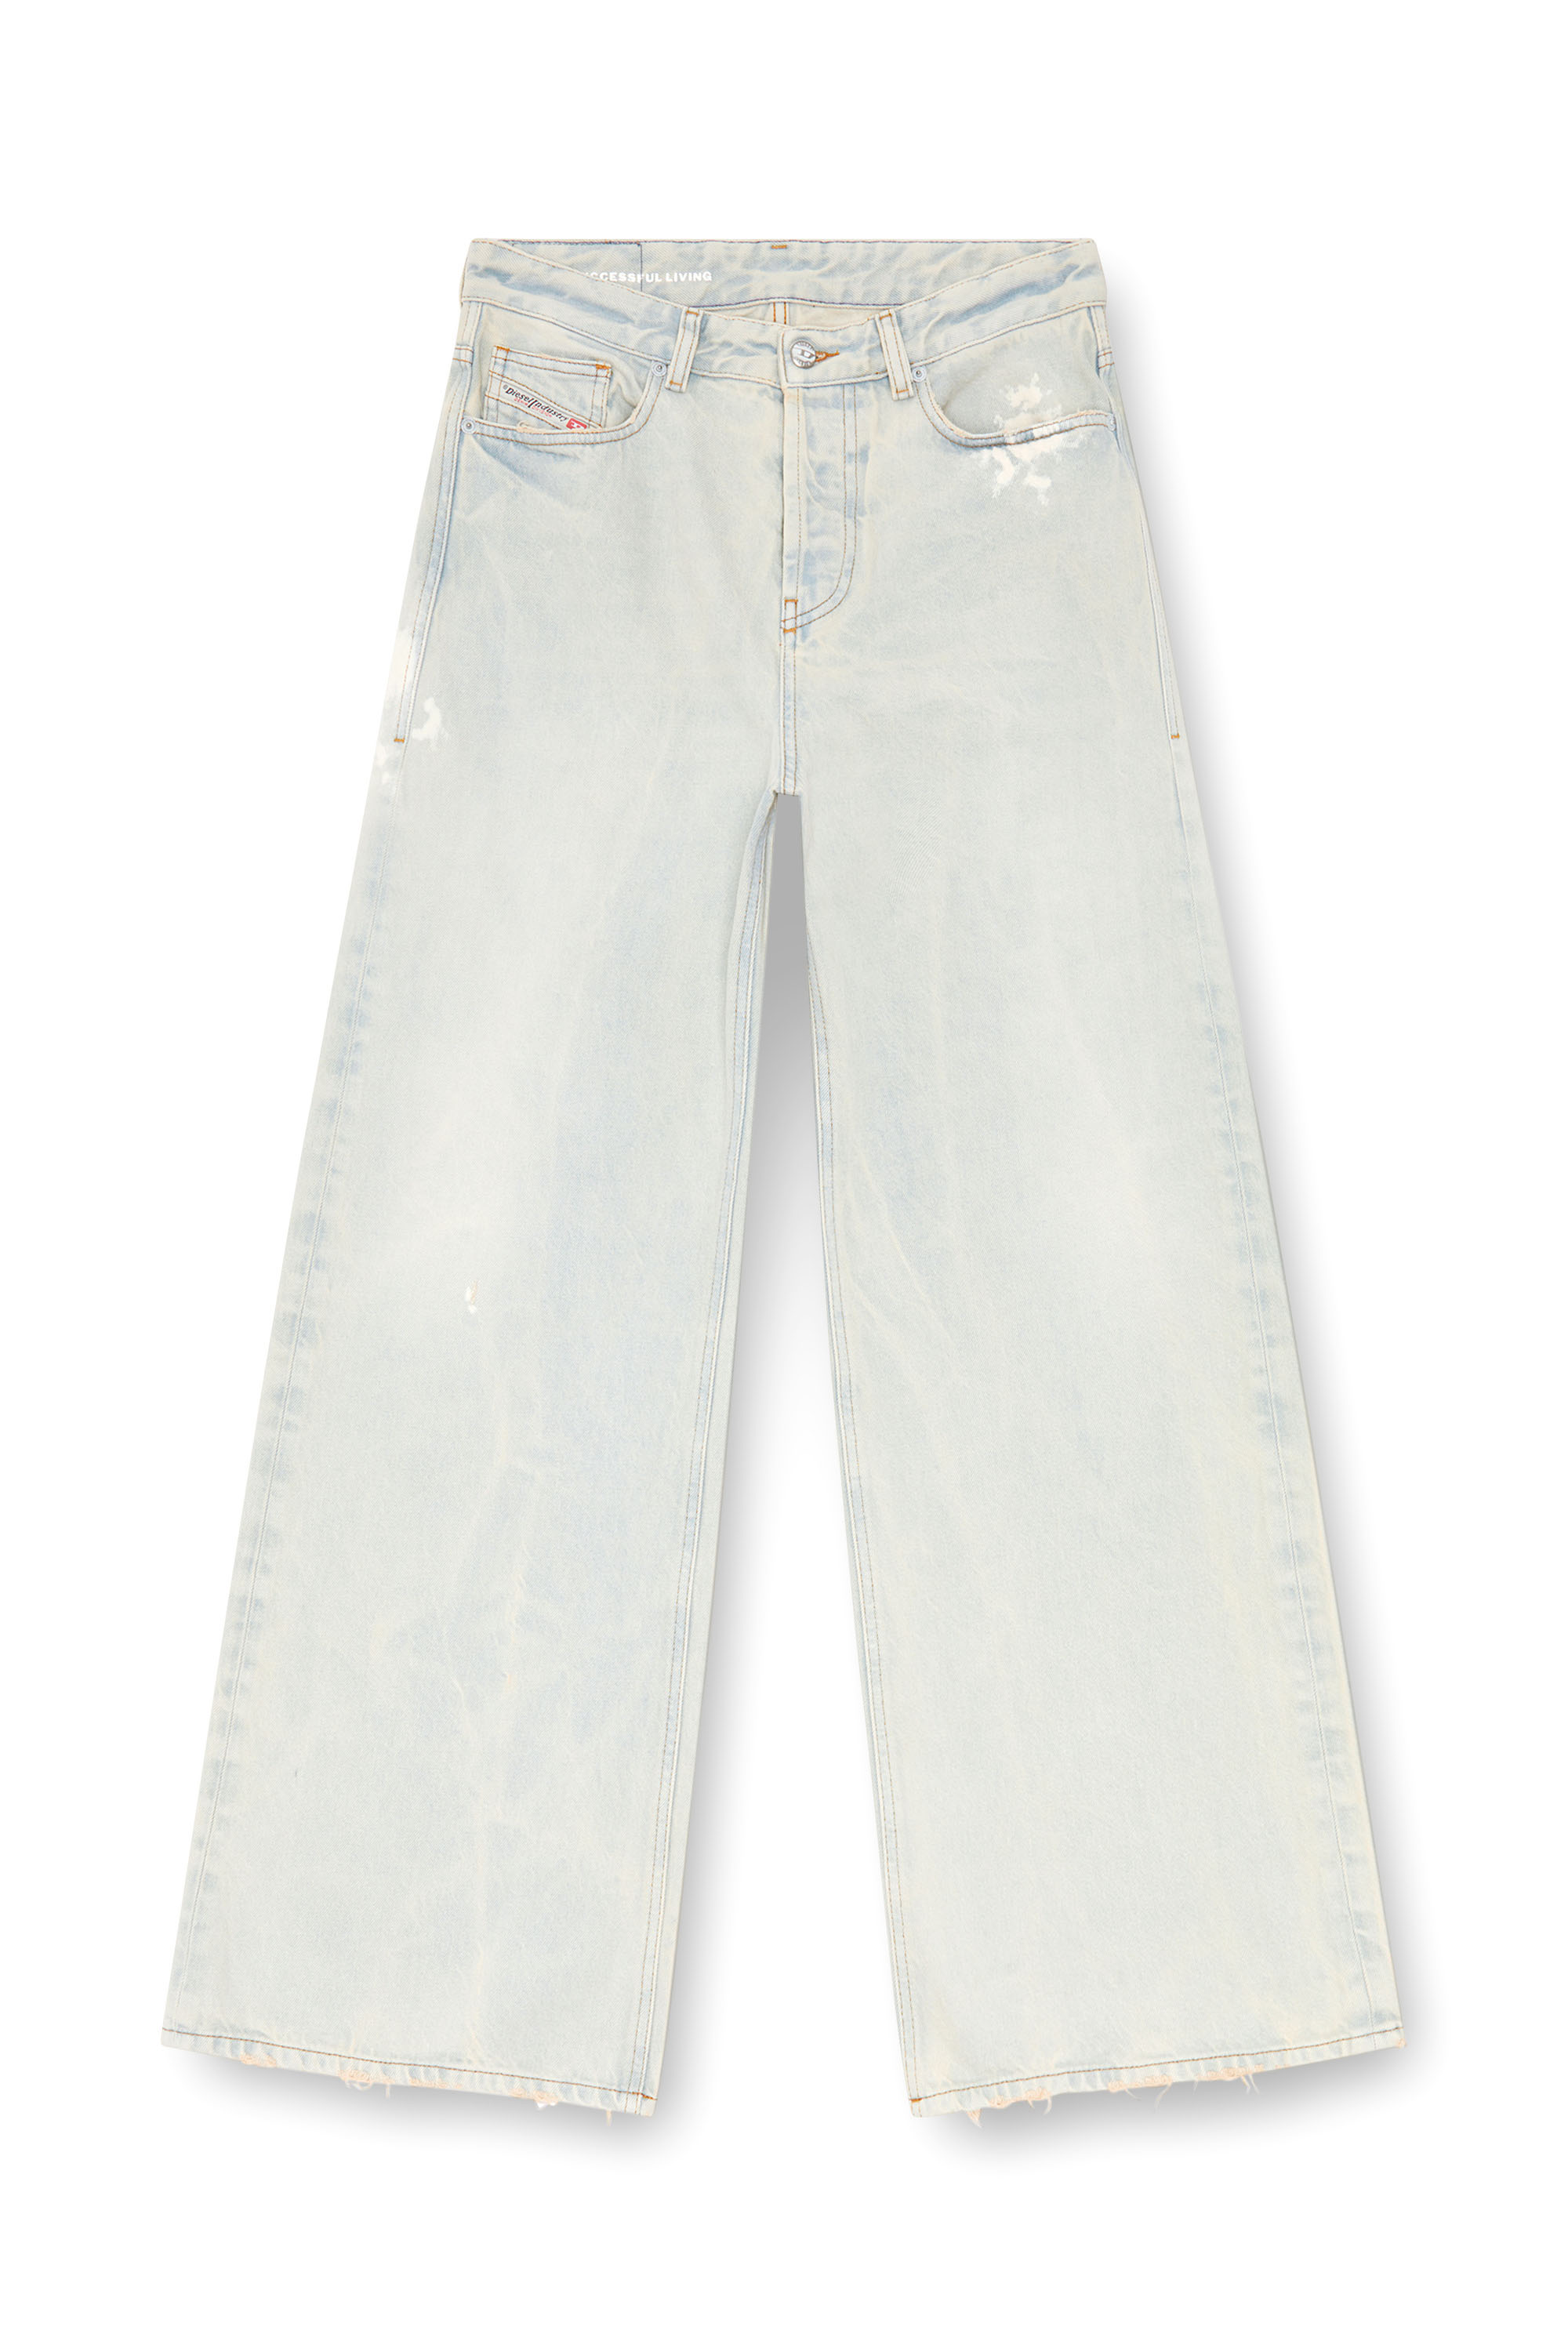 Diesel - Straight Jeans 1996 D-Sire 09J81, Mujer Straight Jeans - 1996 D-Sire in Azul marino - Image 3